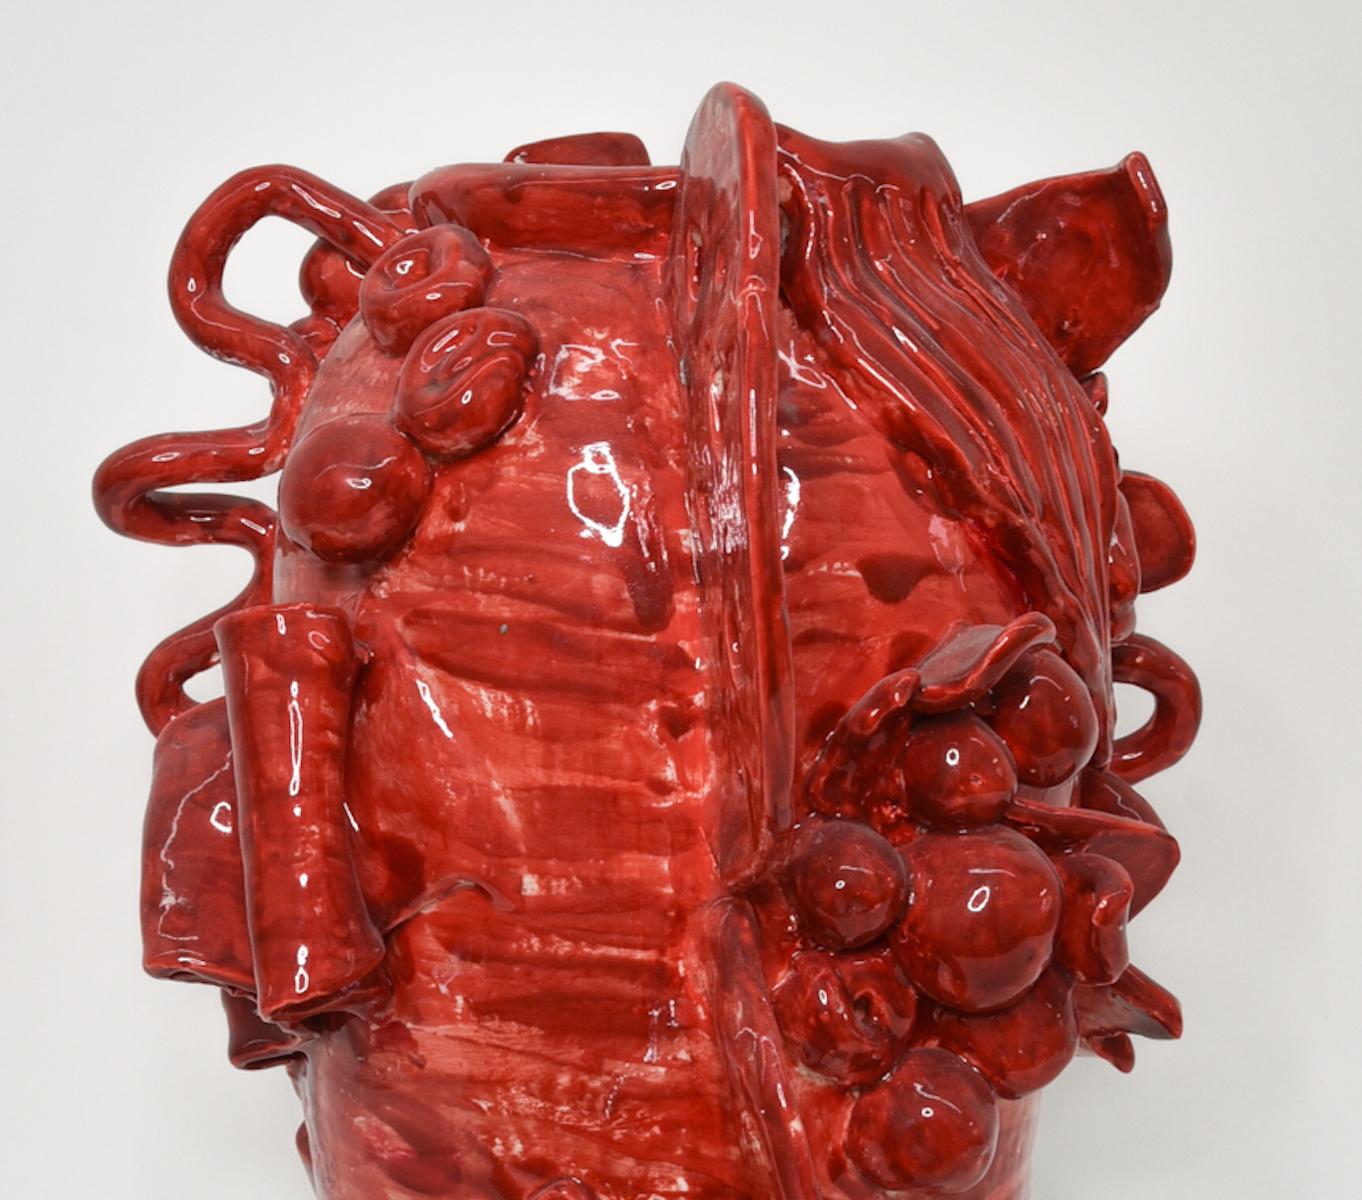 Untitled XIX. Glazed ceramic abstract jar  sculpture - Abstract Sculpture by Charo Oquet